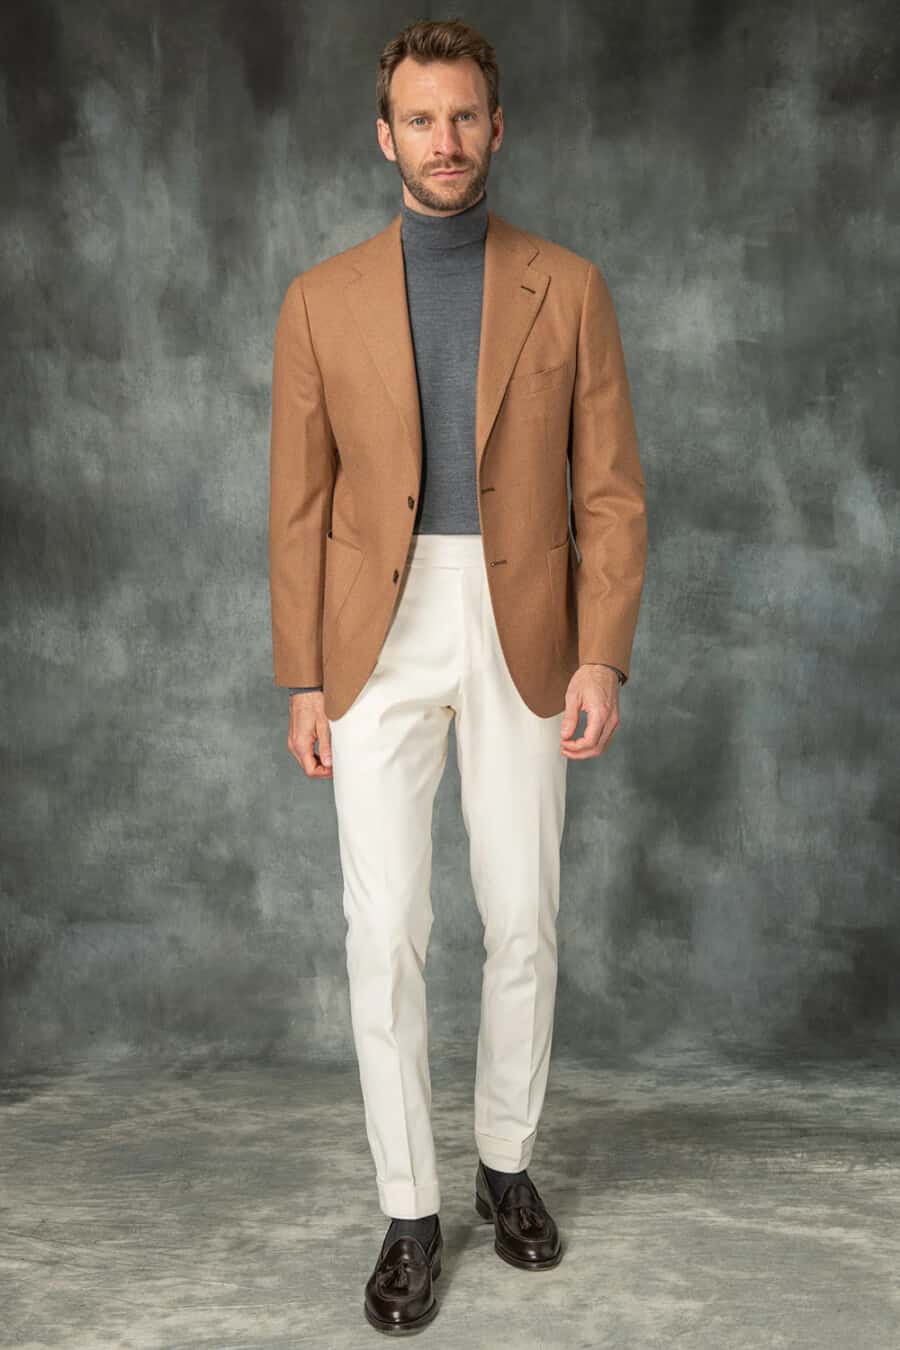 Men's cream pants, grey turtleneck sweater, tobacco blazer and brown leather tassel loafers outfit